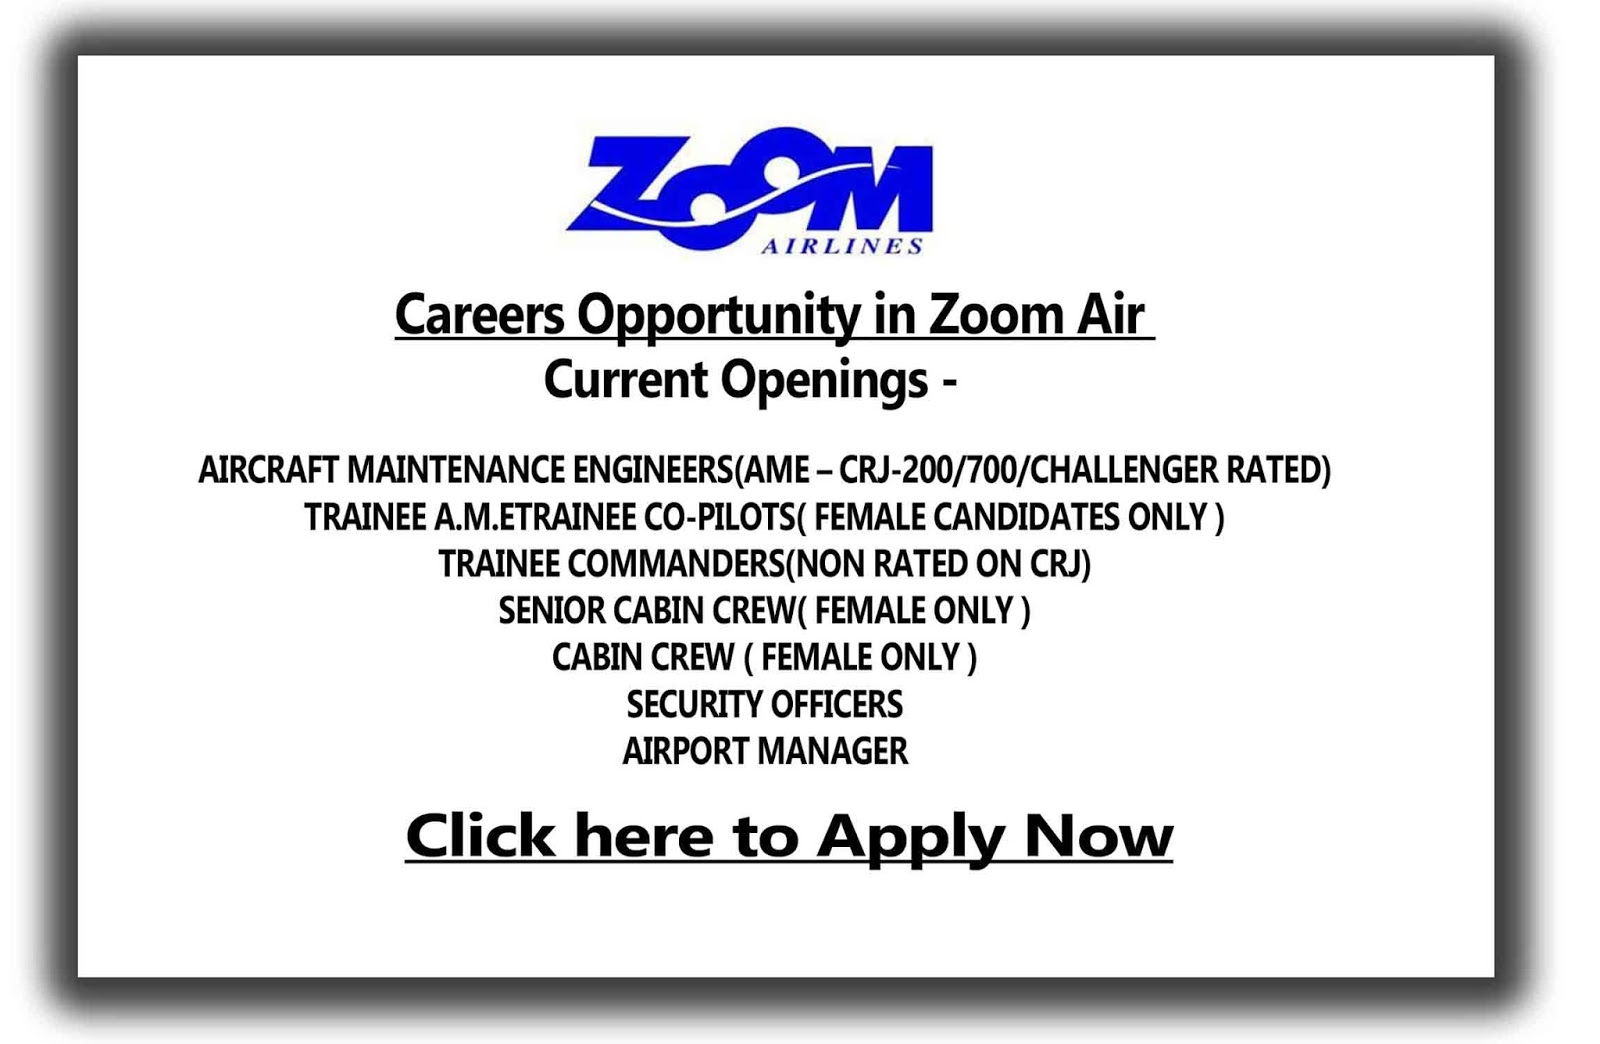 Careers Opportunity in Zoom Air | DGCA 